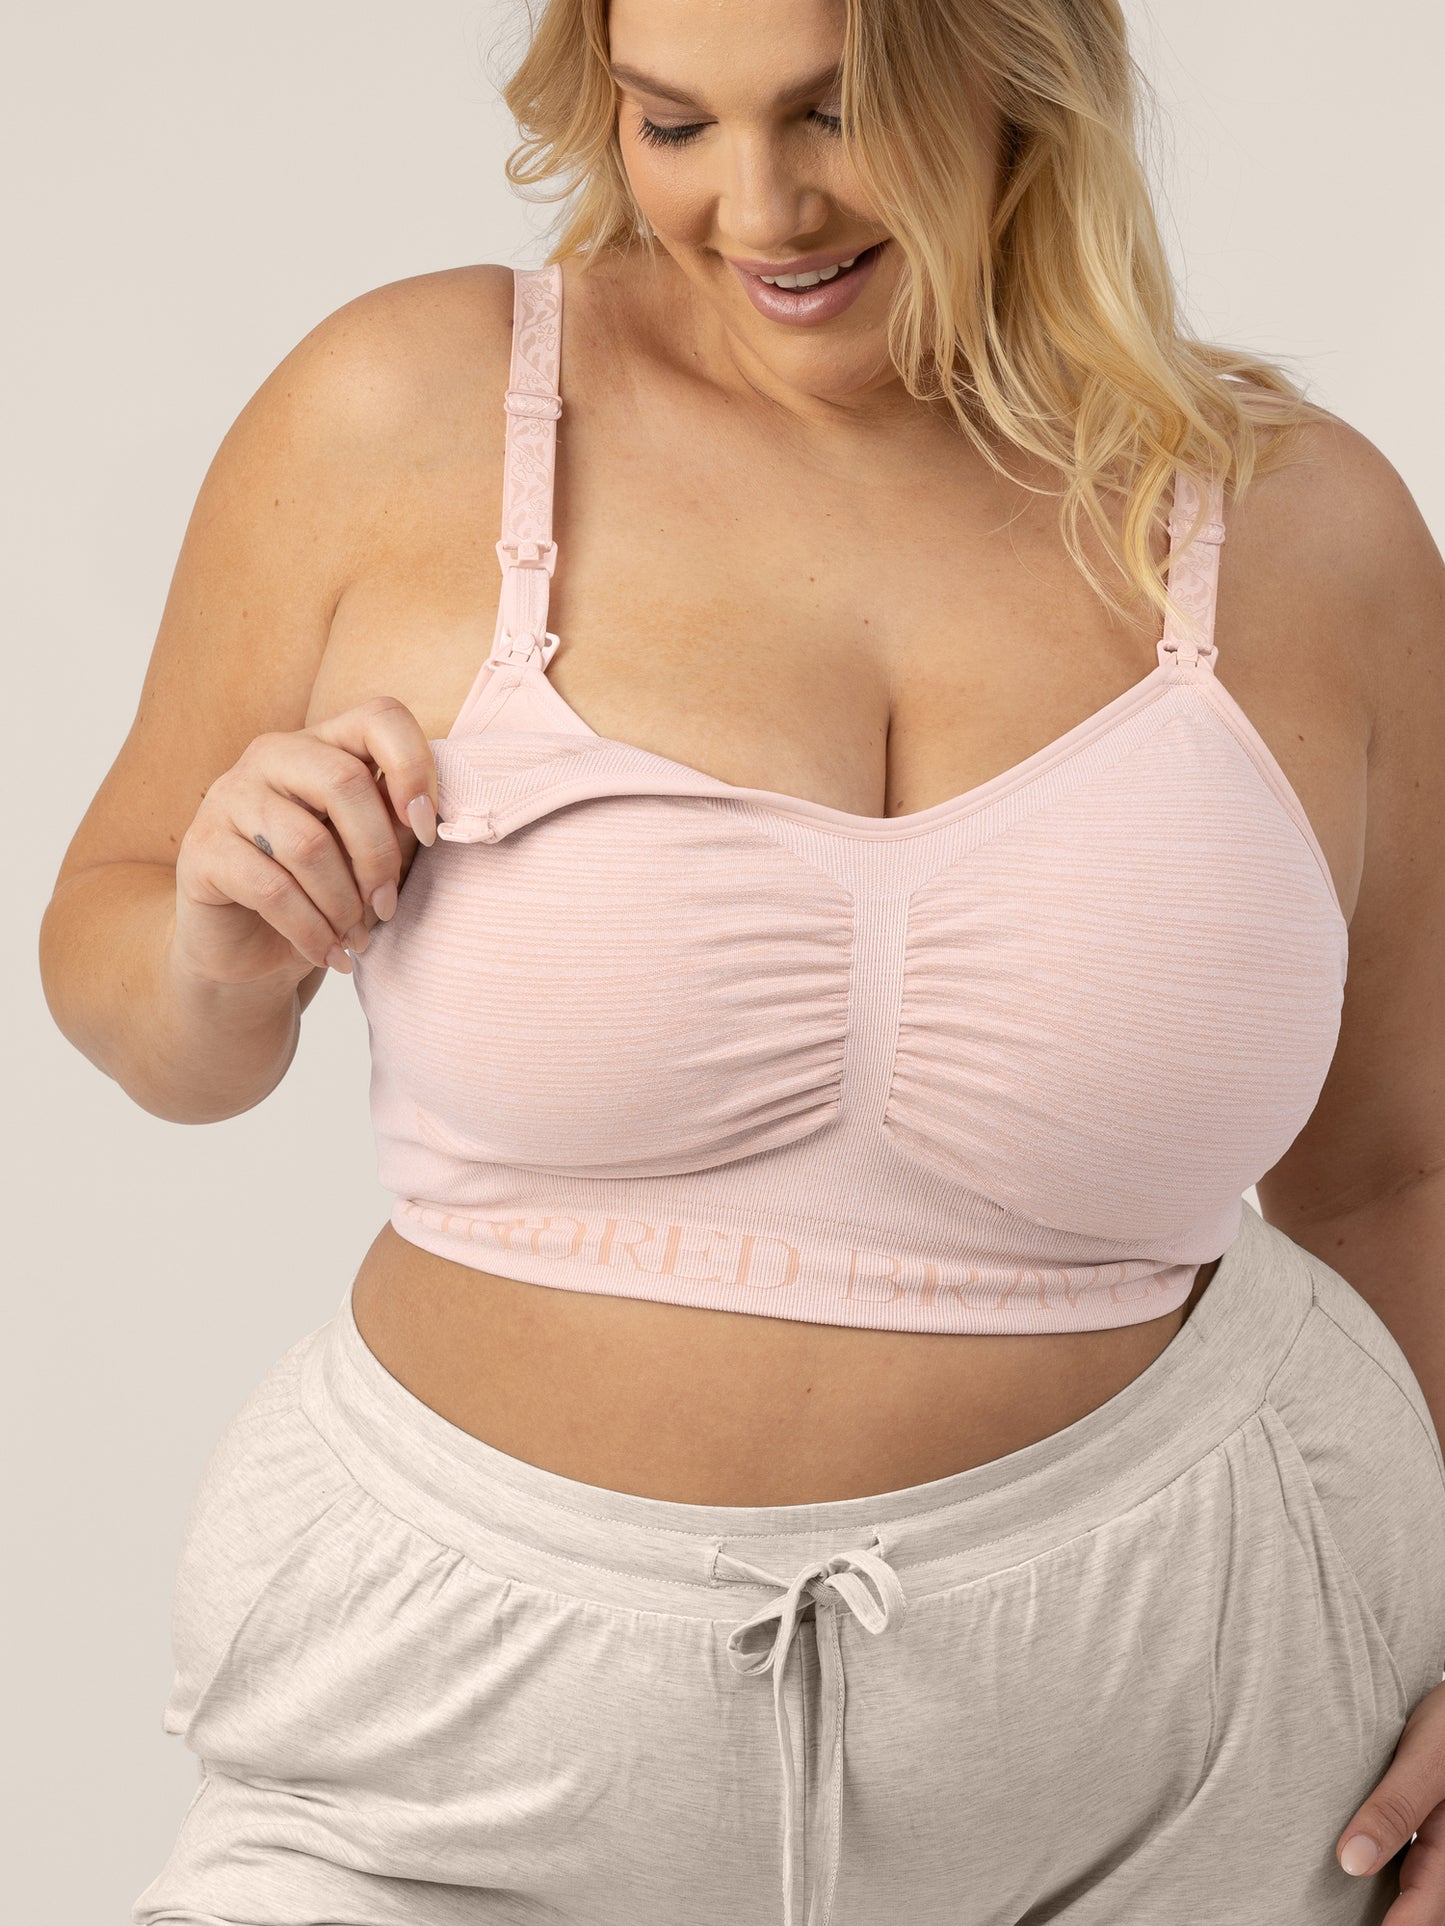 Busty model wearing the Sublime® Hands-Free Pumping & Nursing Bra in Pink Heather